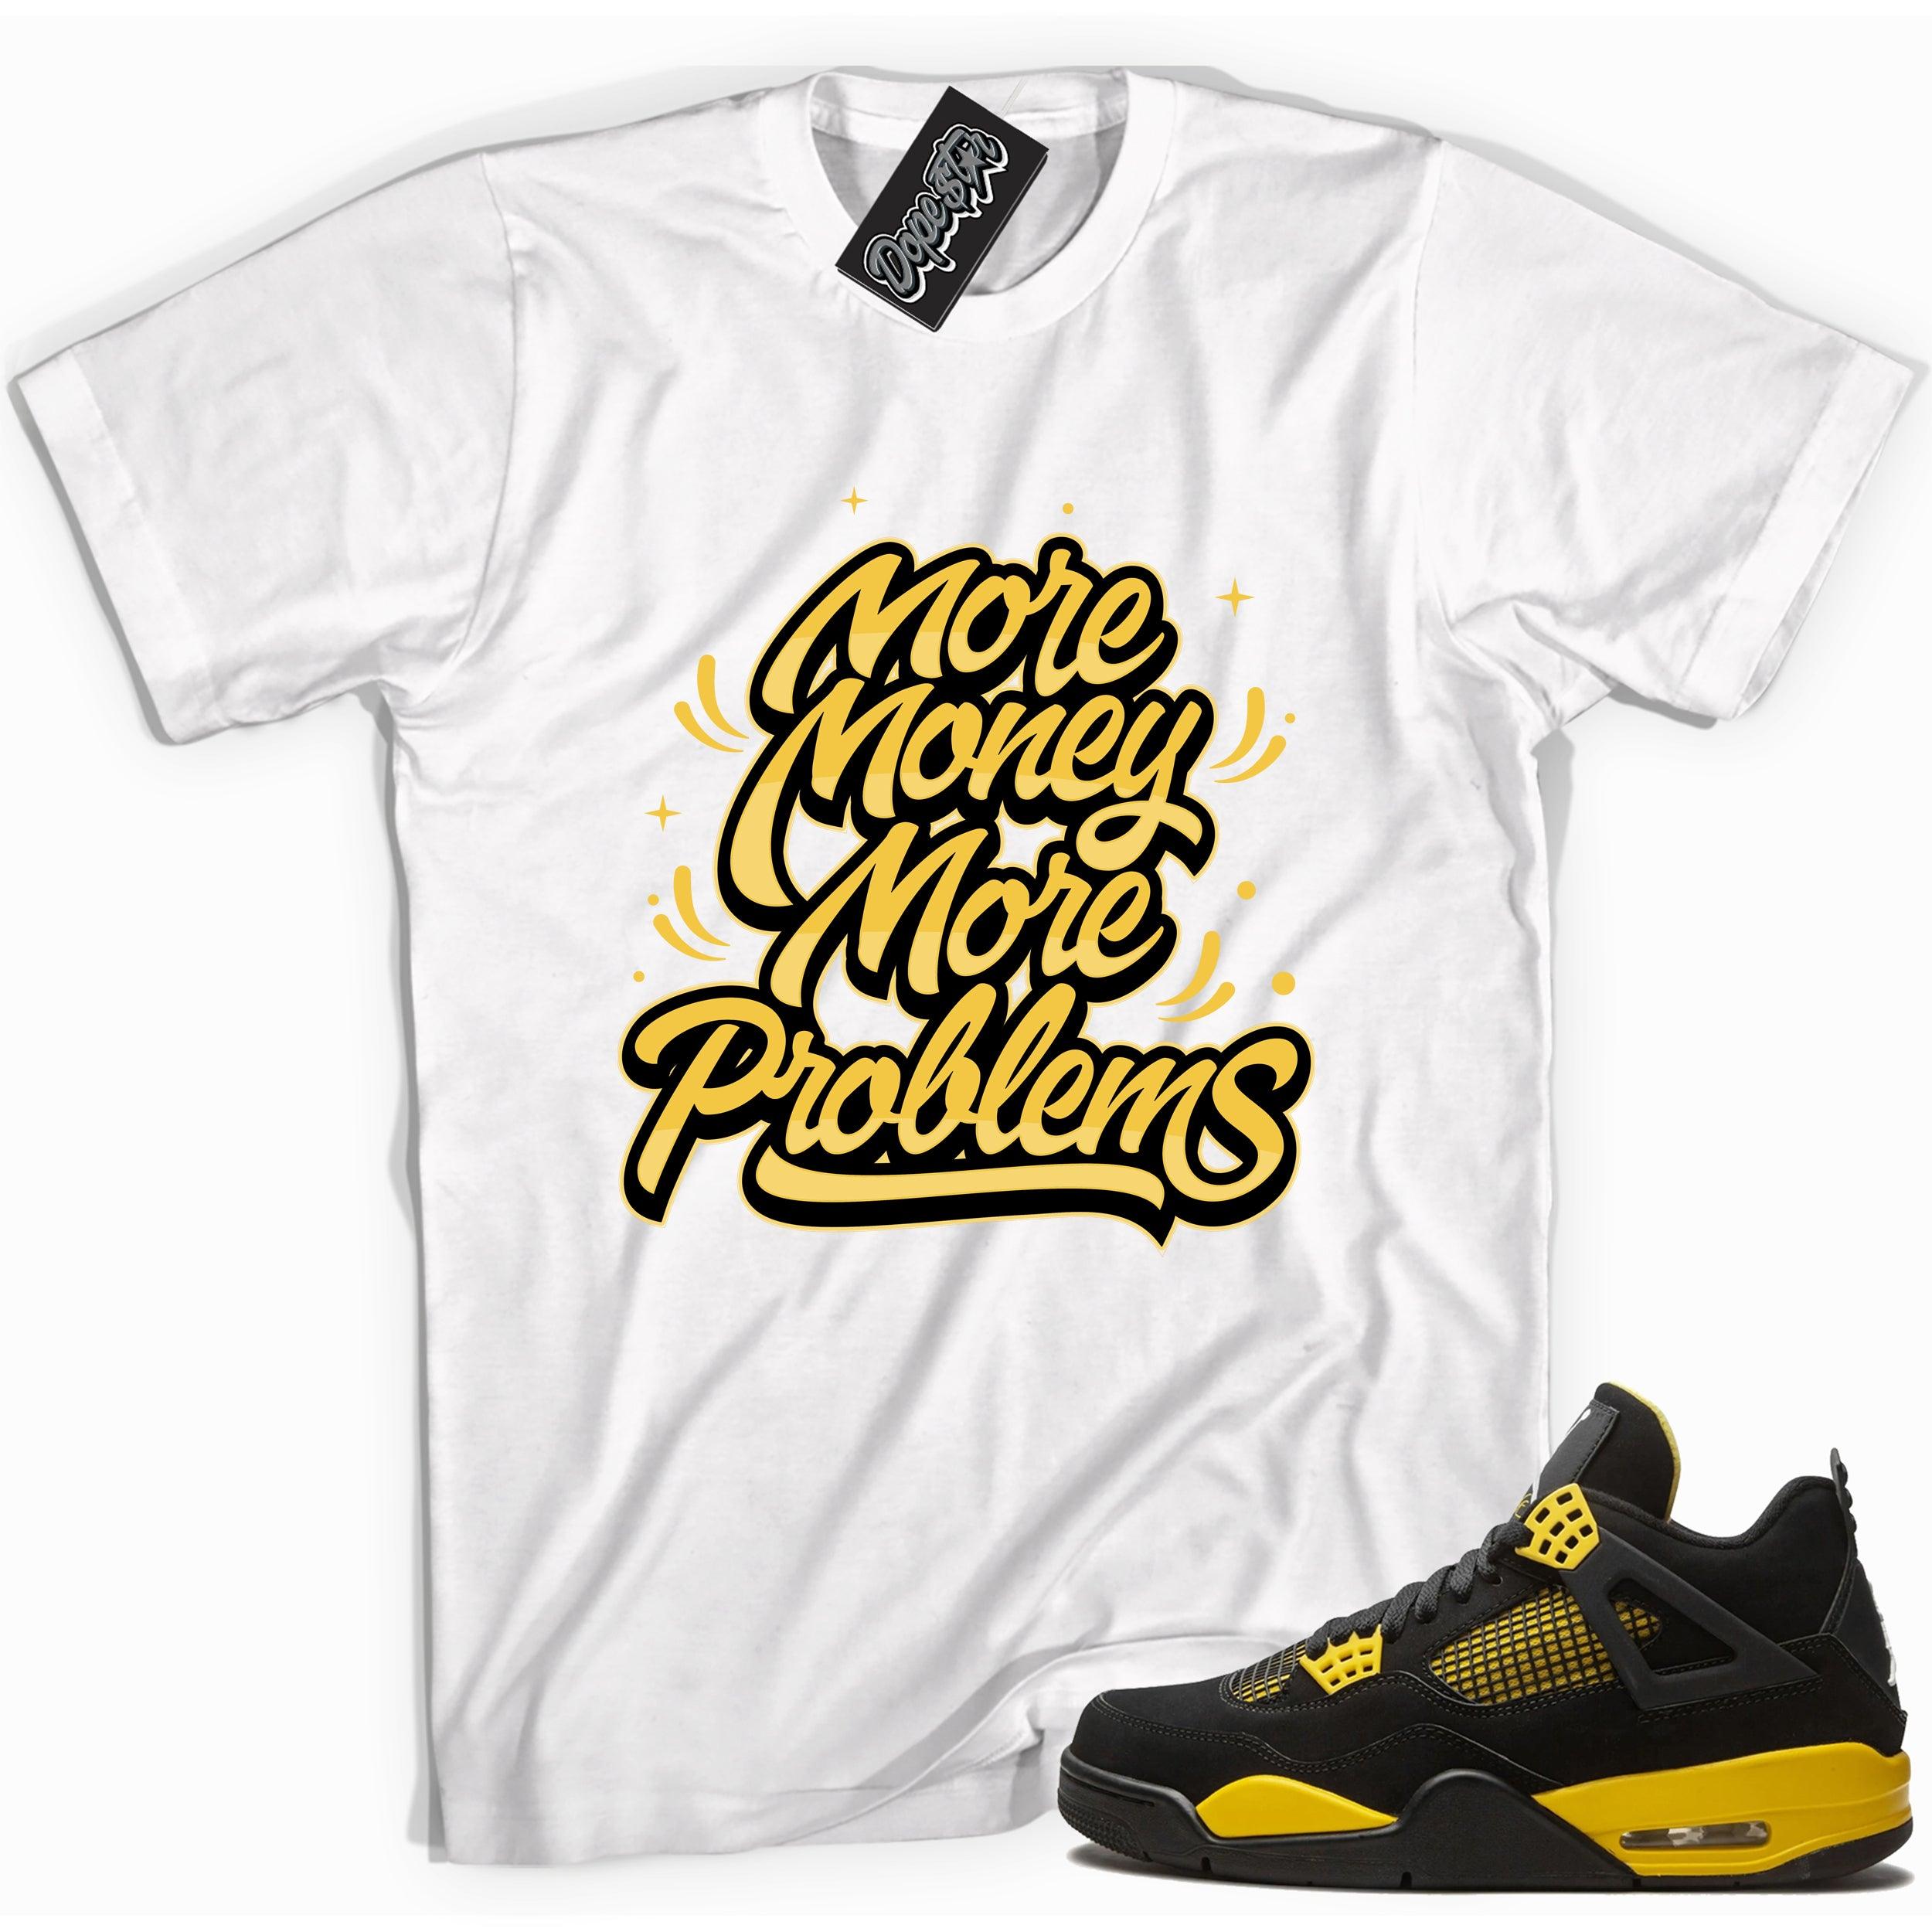 Cool white graphic tee with 'more money more problems' print, that perfectly matches Air Jordan 4 Thunder sneakers